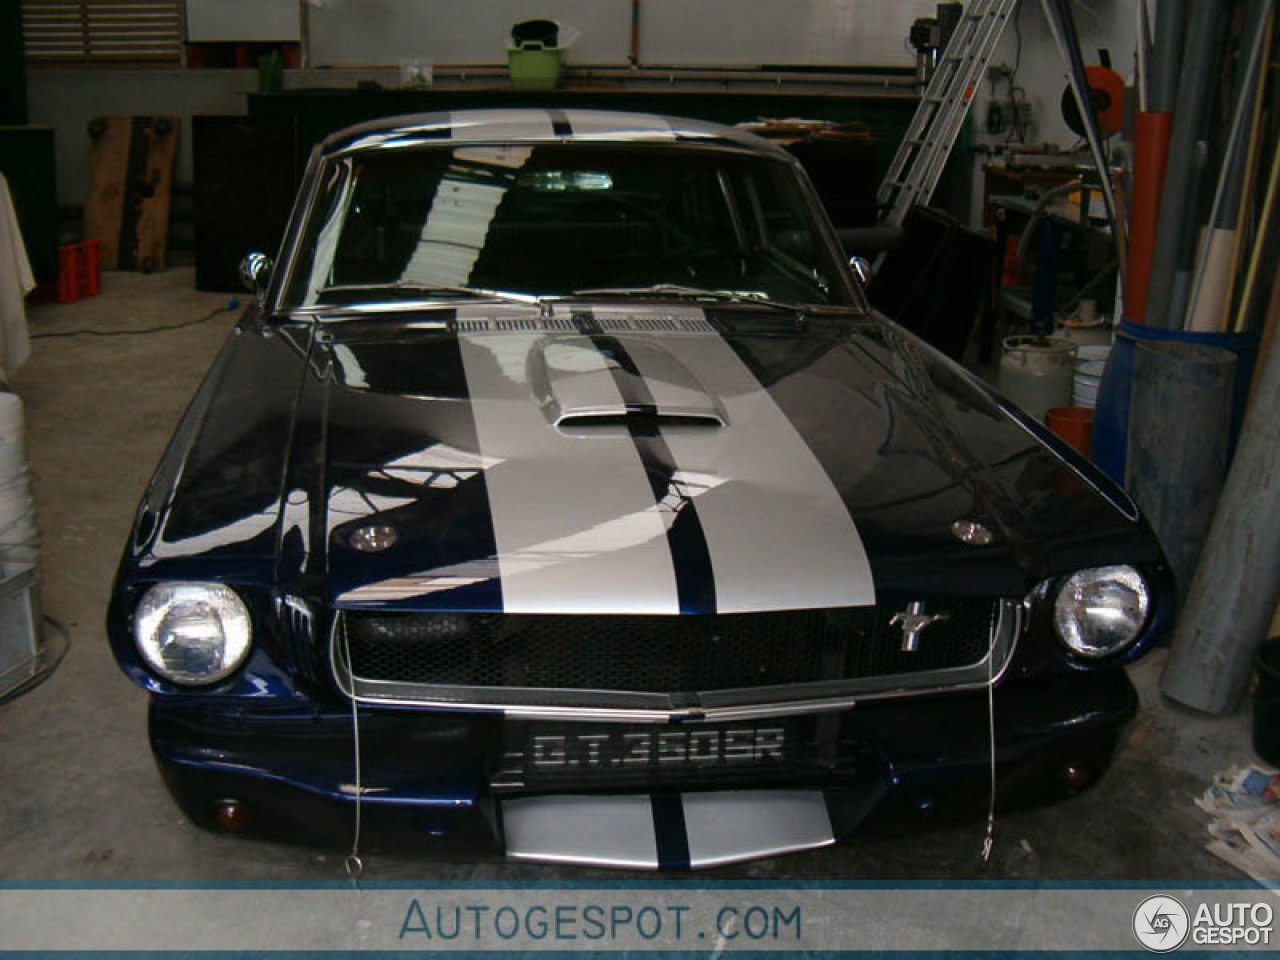 Ford Mustang Shelby G.T. 350 SR